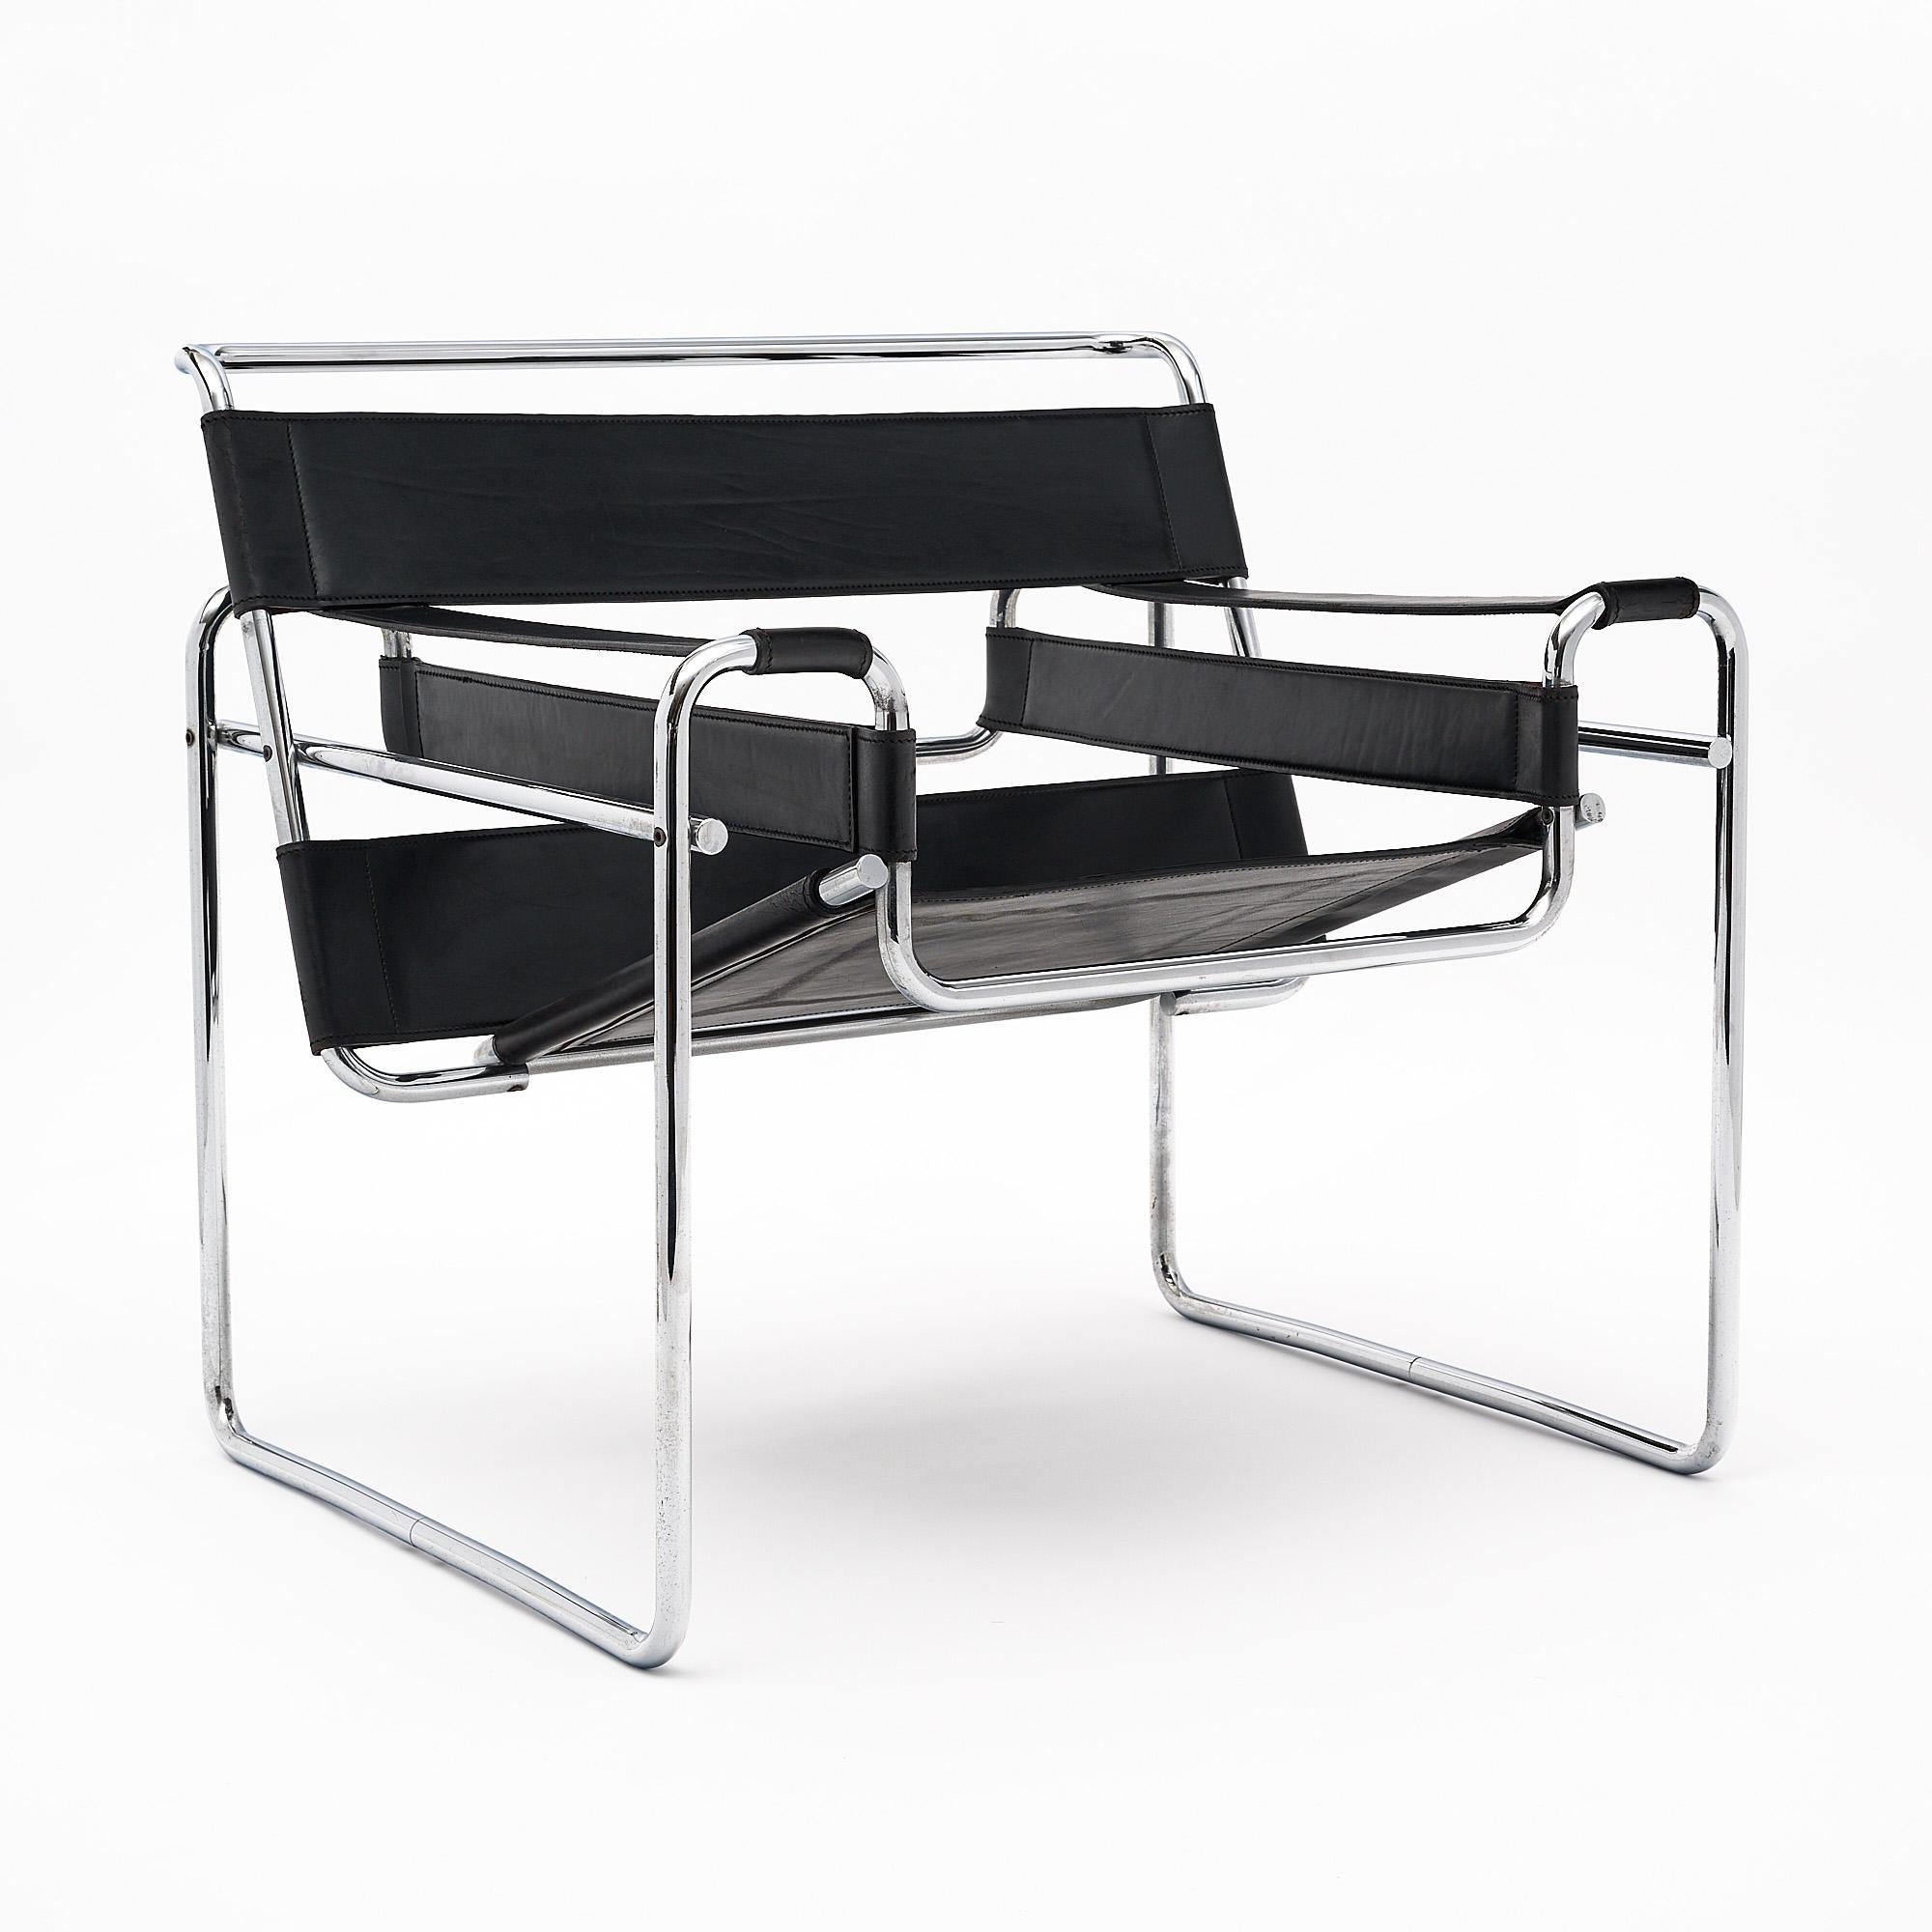 Armchair, Italian, produced by Gavina. This B3 armchair by Marcel Breuer features a bent chromed steel tubular construction and black stained leather hide with lovely stitching.